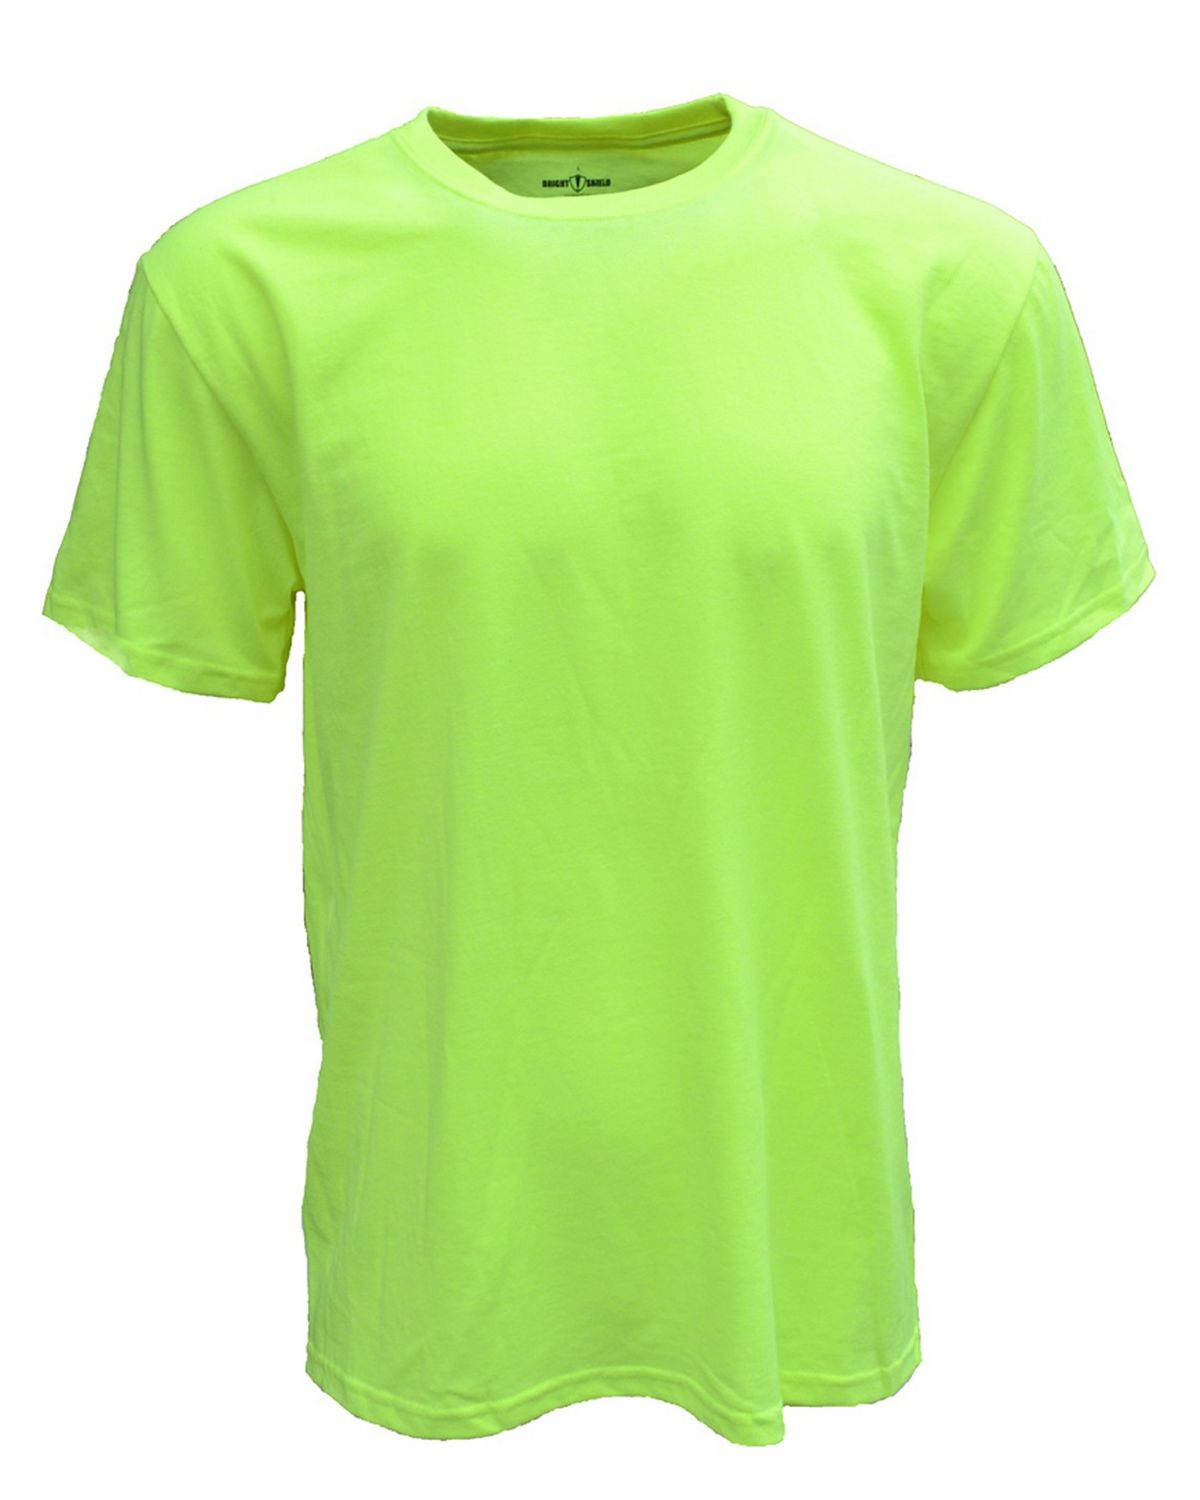 Bright Shield BS106 Adult Basic Tee - Shop at ApparelnBags.com